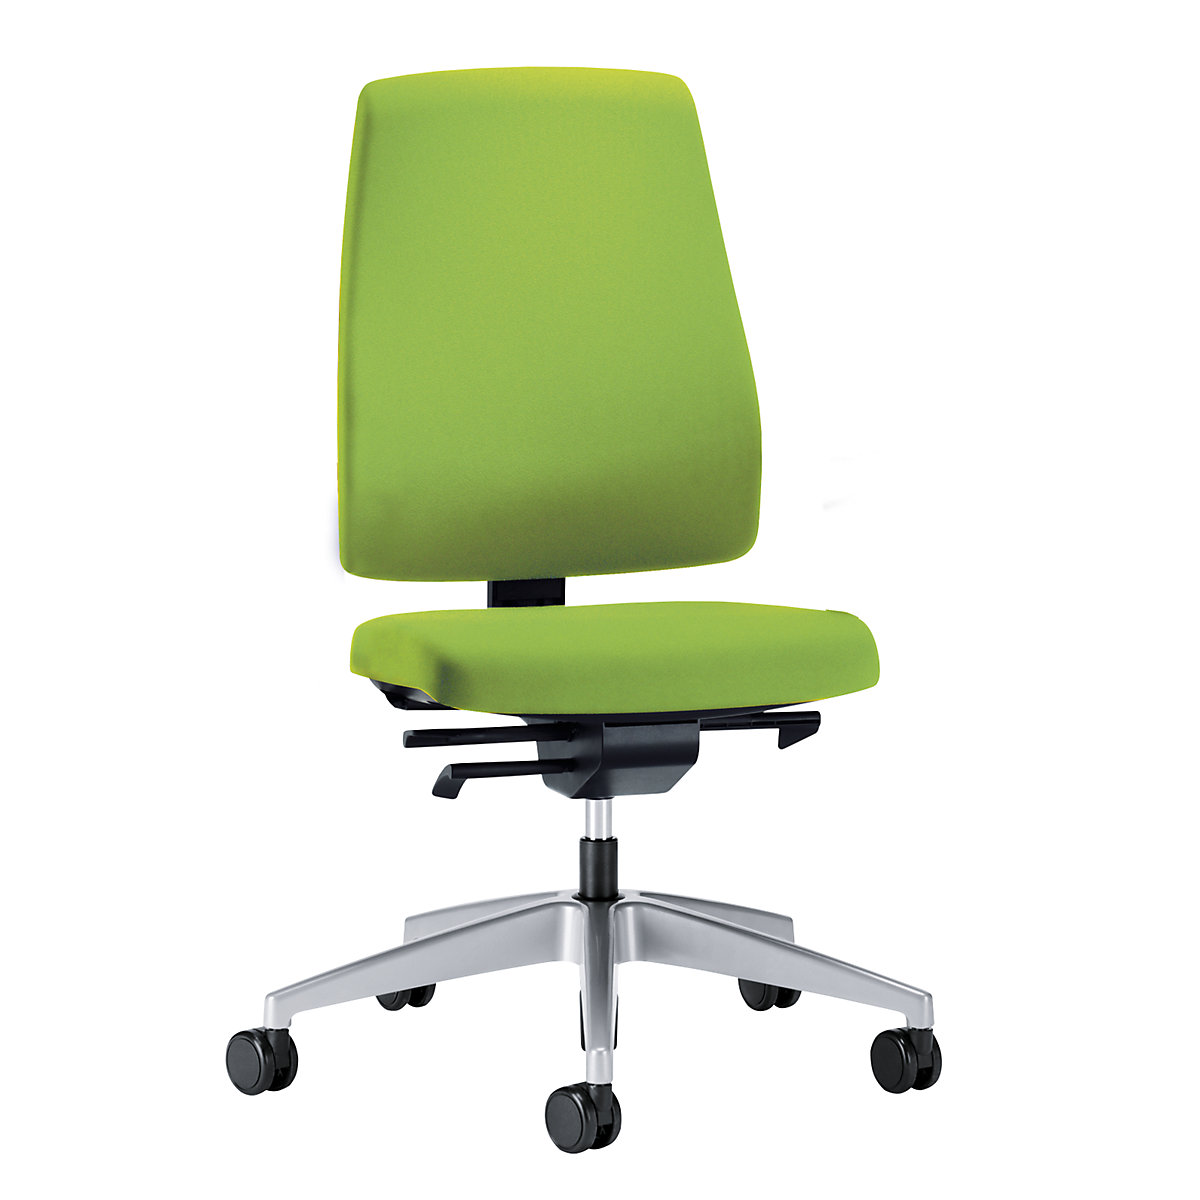 GOAL office swivel chair, back rest height 530 mm – interstuhl, brilliant silver frame, with soft castors, yellow green, seat depth 410 mm-2